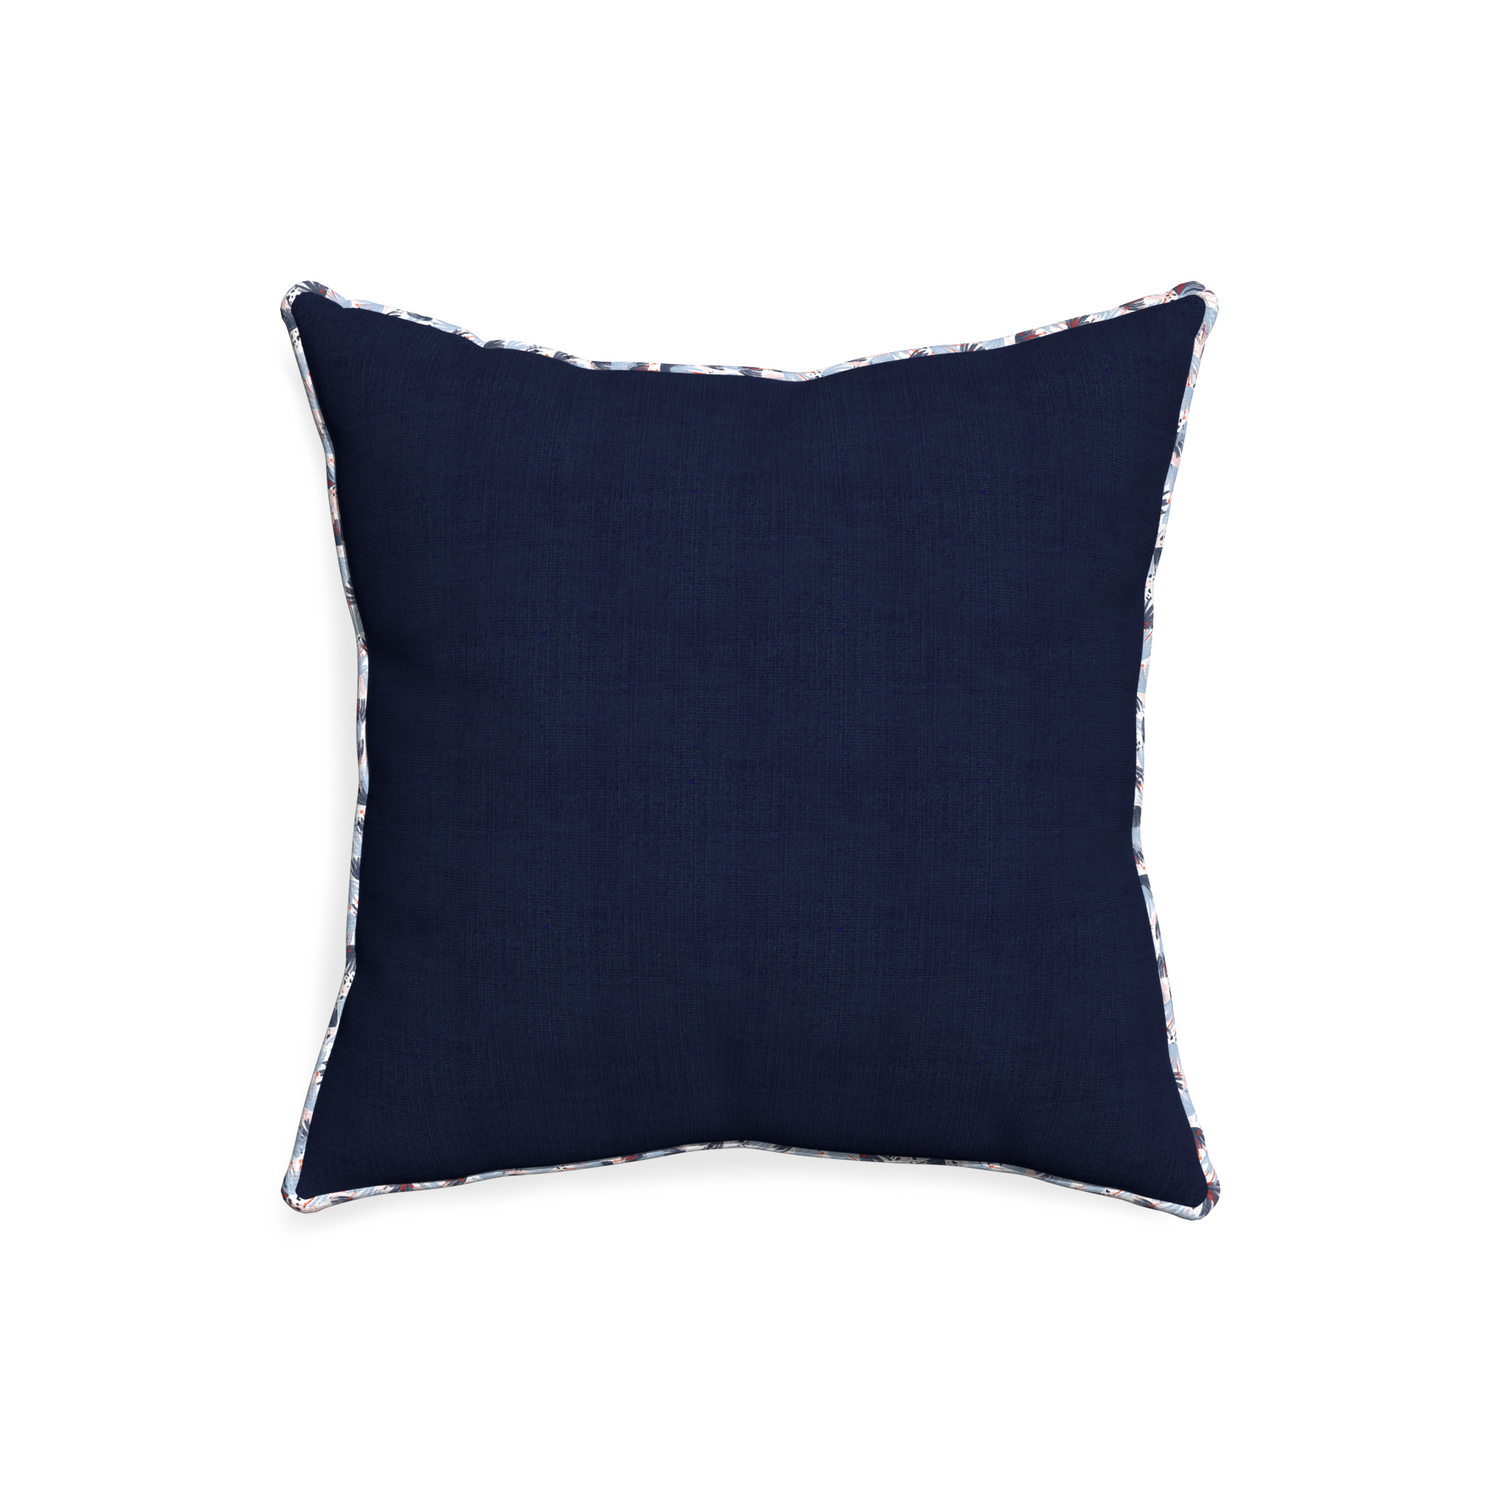 20-square midnight custom pillow with e piping on white background